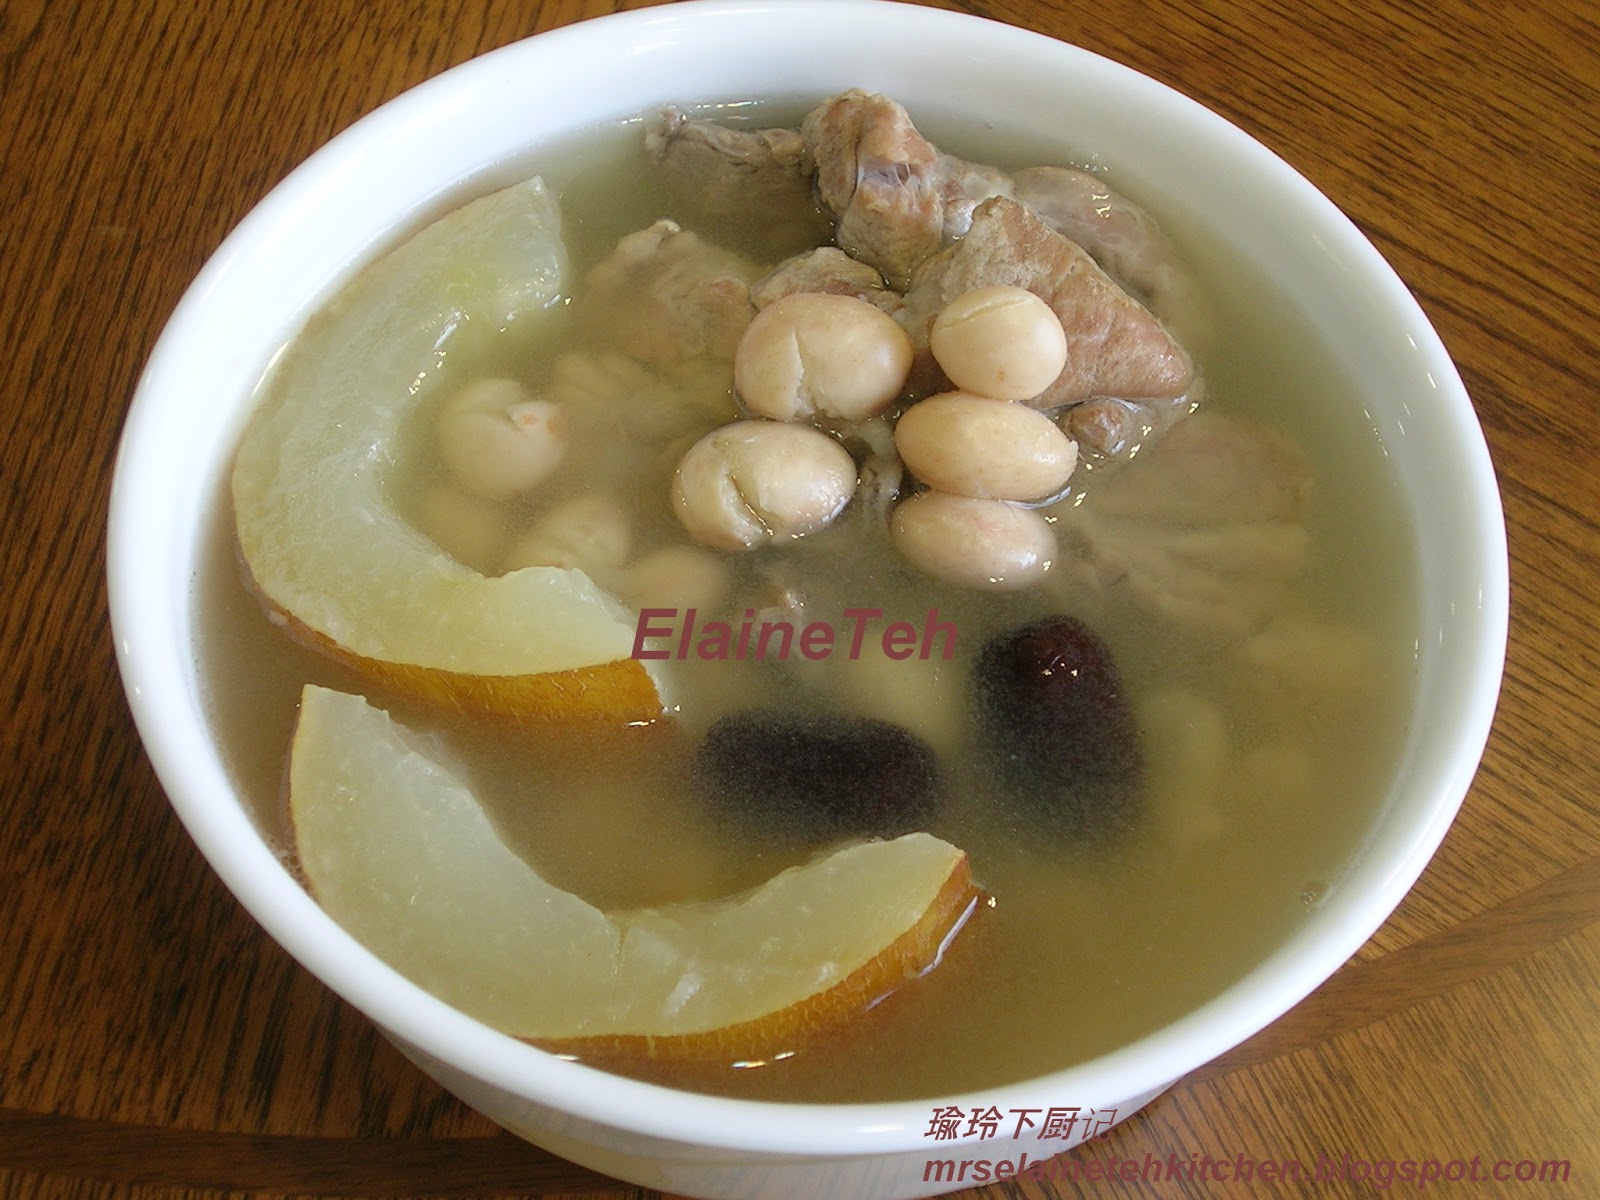 Violet's Kitchen ~♥紫羅蘭的爱心厨房♥~ : 莲藕珍珠豆汤 Lotus Root & Cranberry Bean Soup